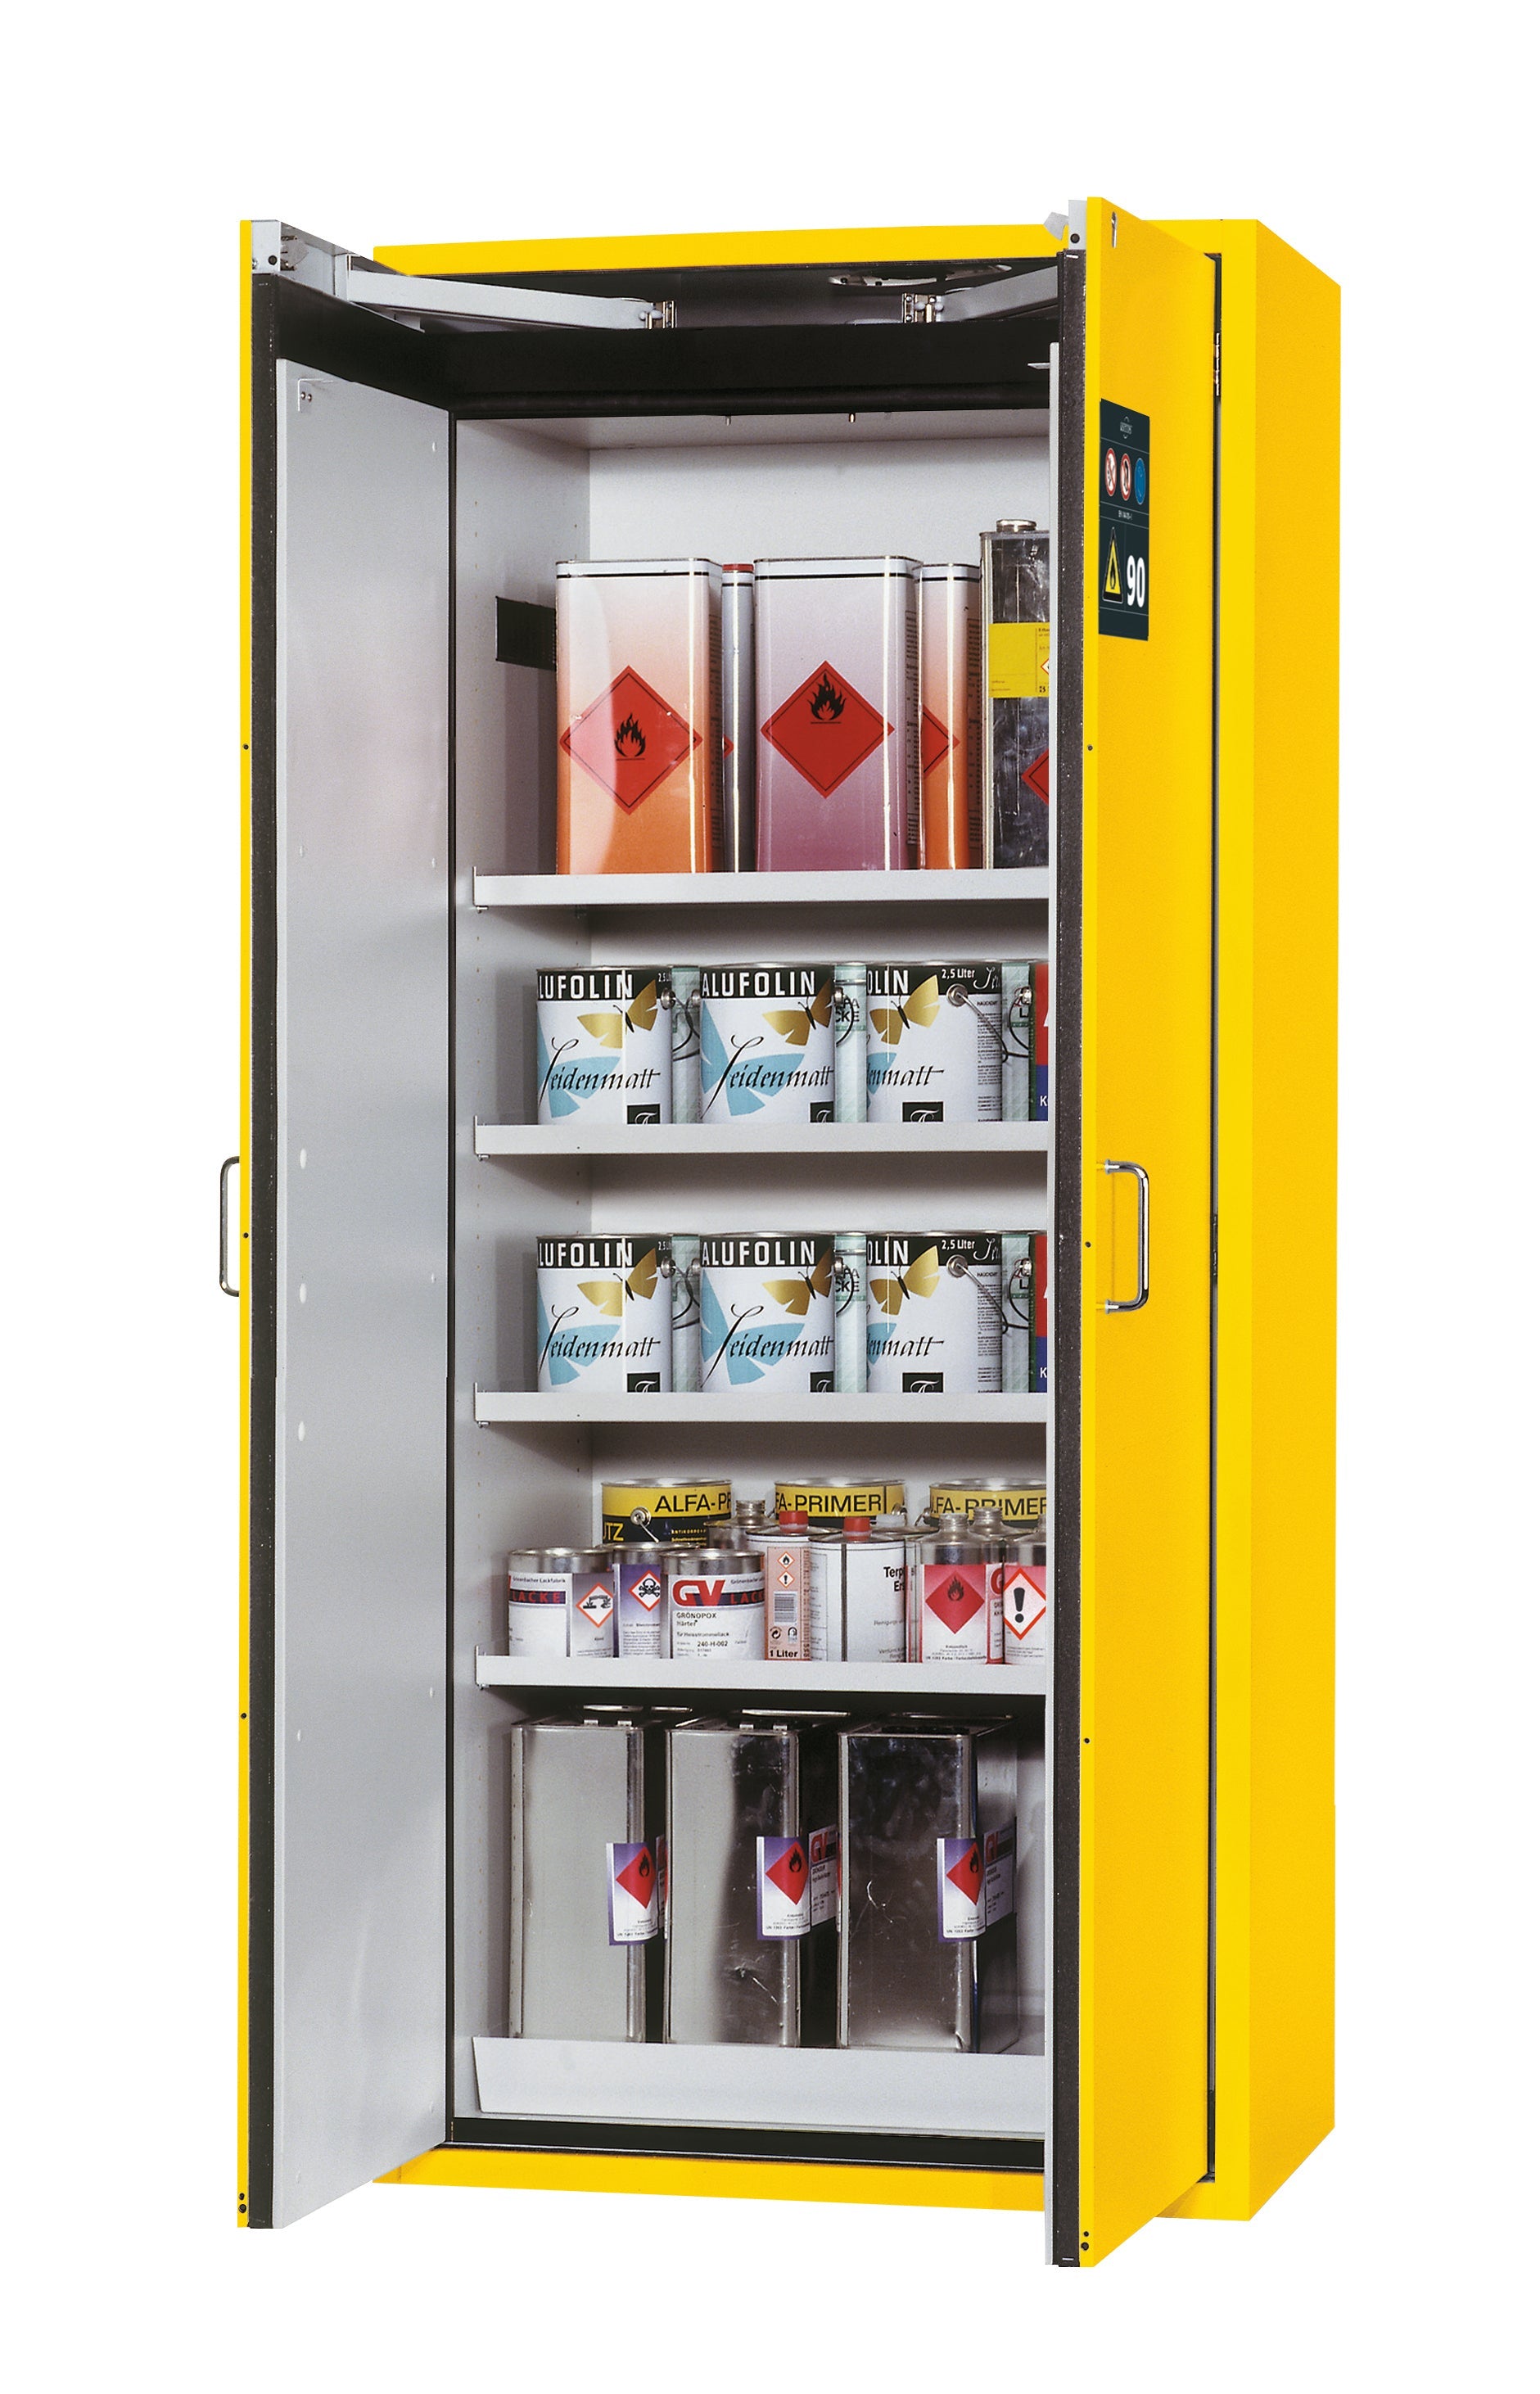 Type 90 safety cabinet S-CLASSIC-90 model S90.196.090 in safety yellow RAL 1004 with 4x standard shelves (sheet steel)